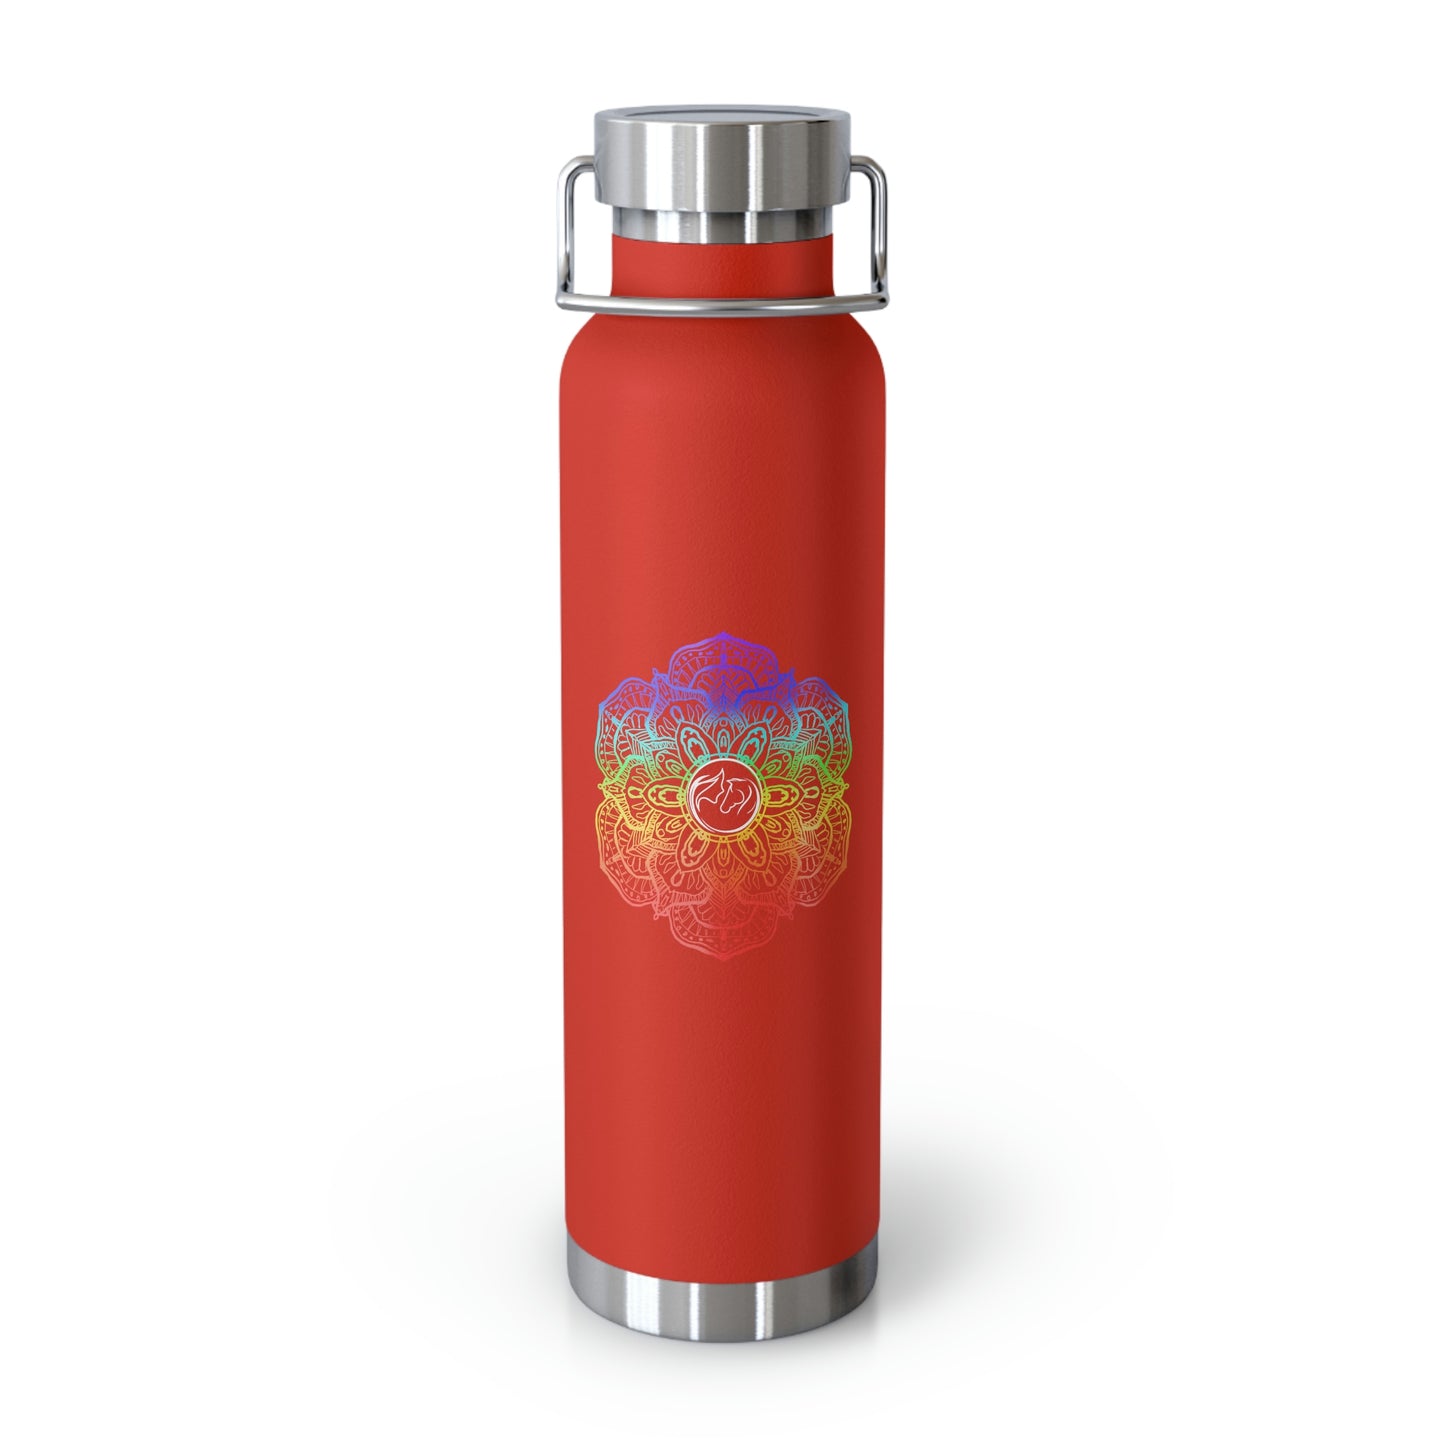 Copper Vacuum Insulated Bottle, 22oz with Chakra Design